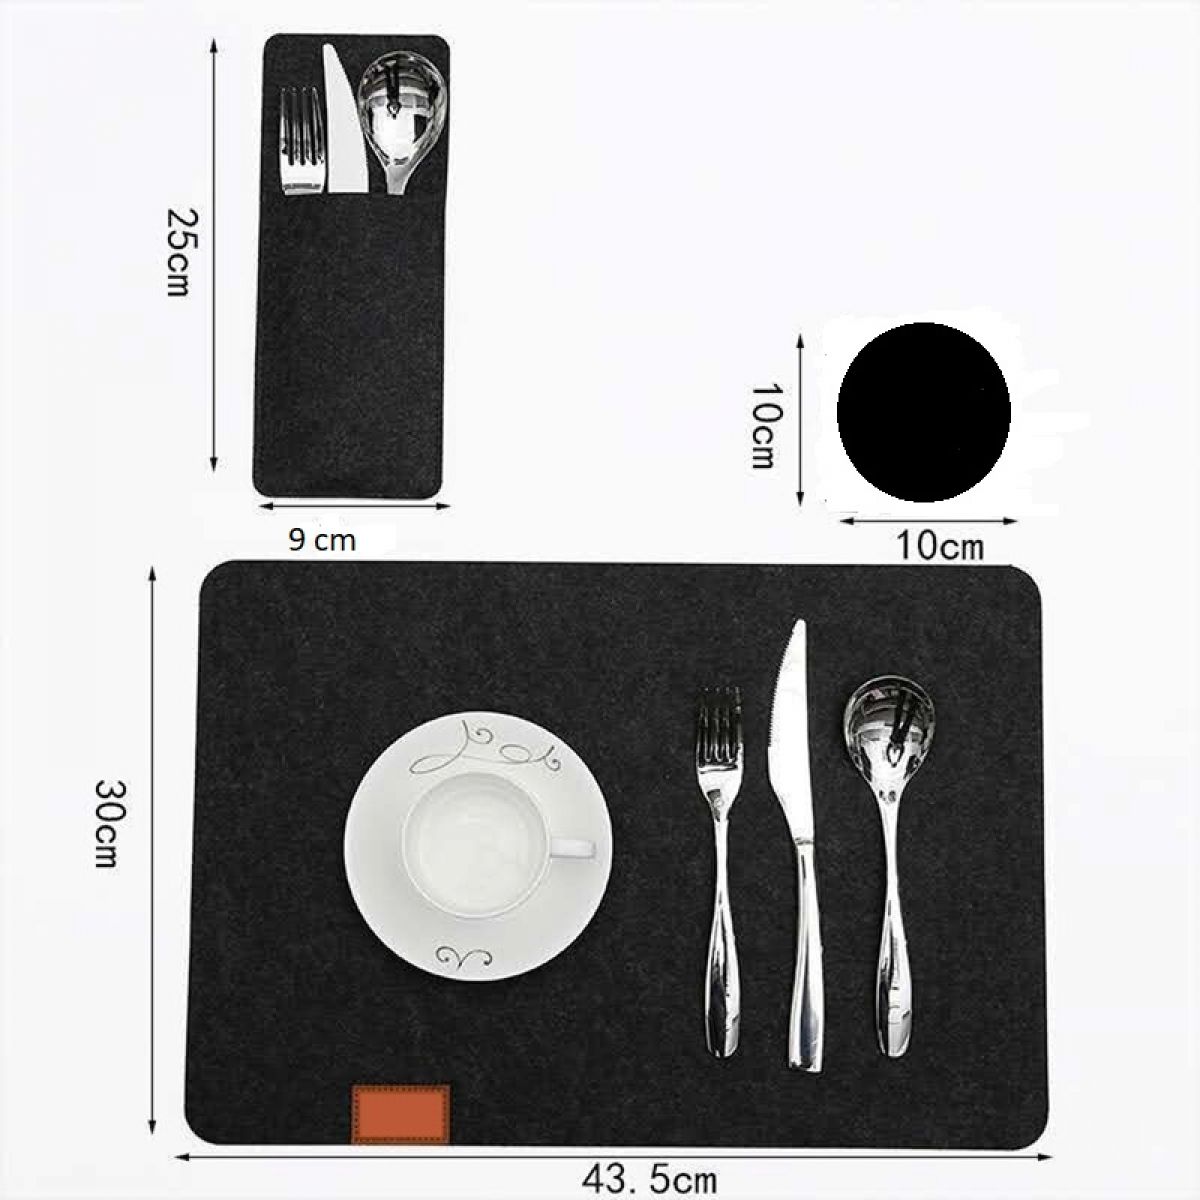 Table mat 44×30 cm, set of 18 items